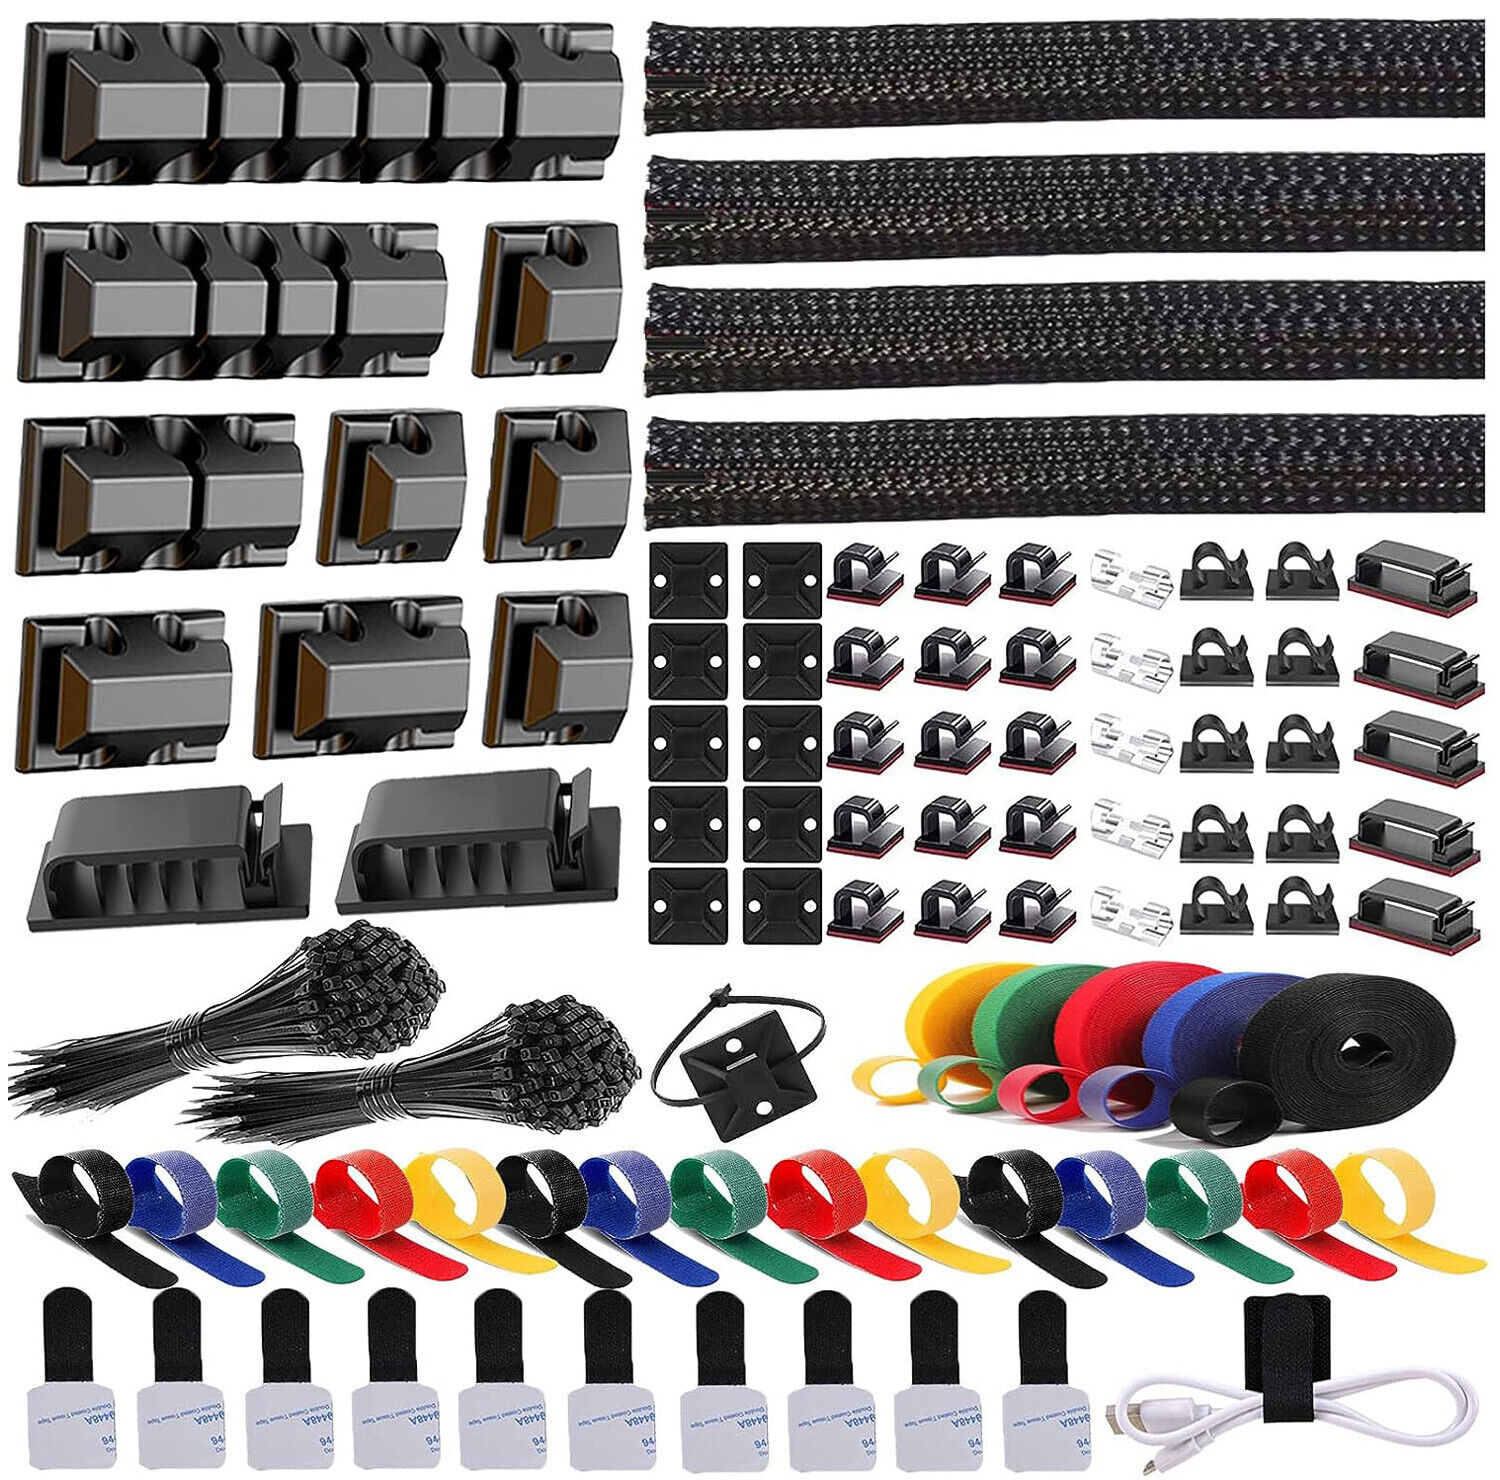 300Pcs Cable Clips Self-Adhesive Cord Wire Holder Management Organizer Clamp